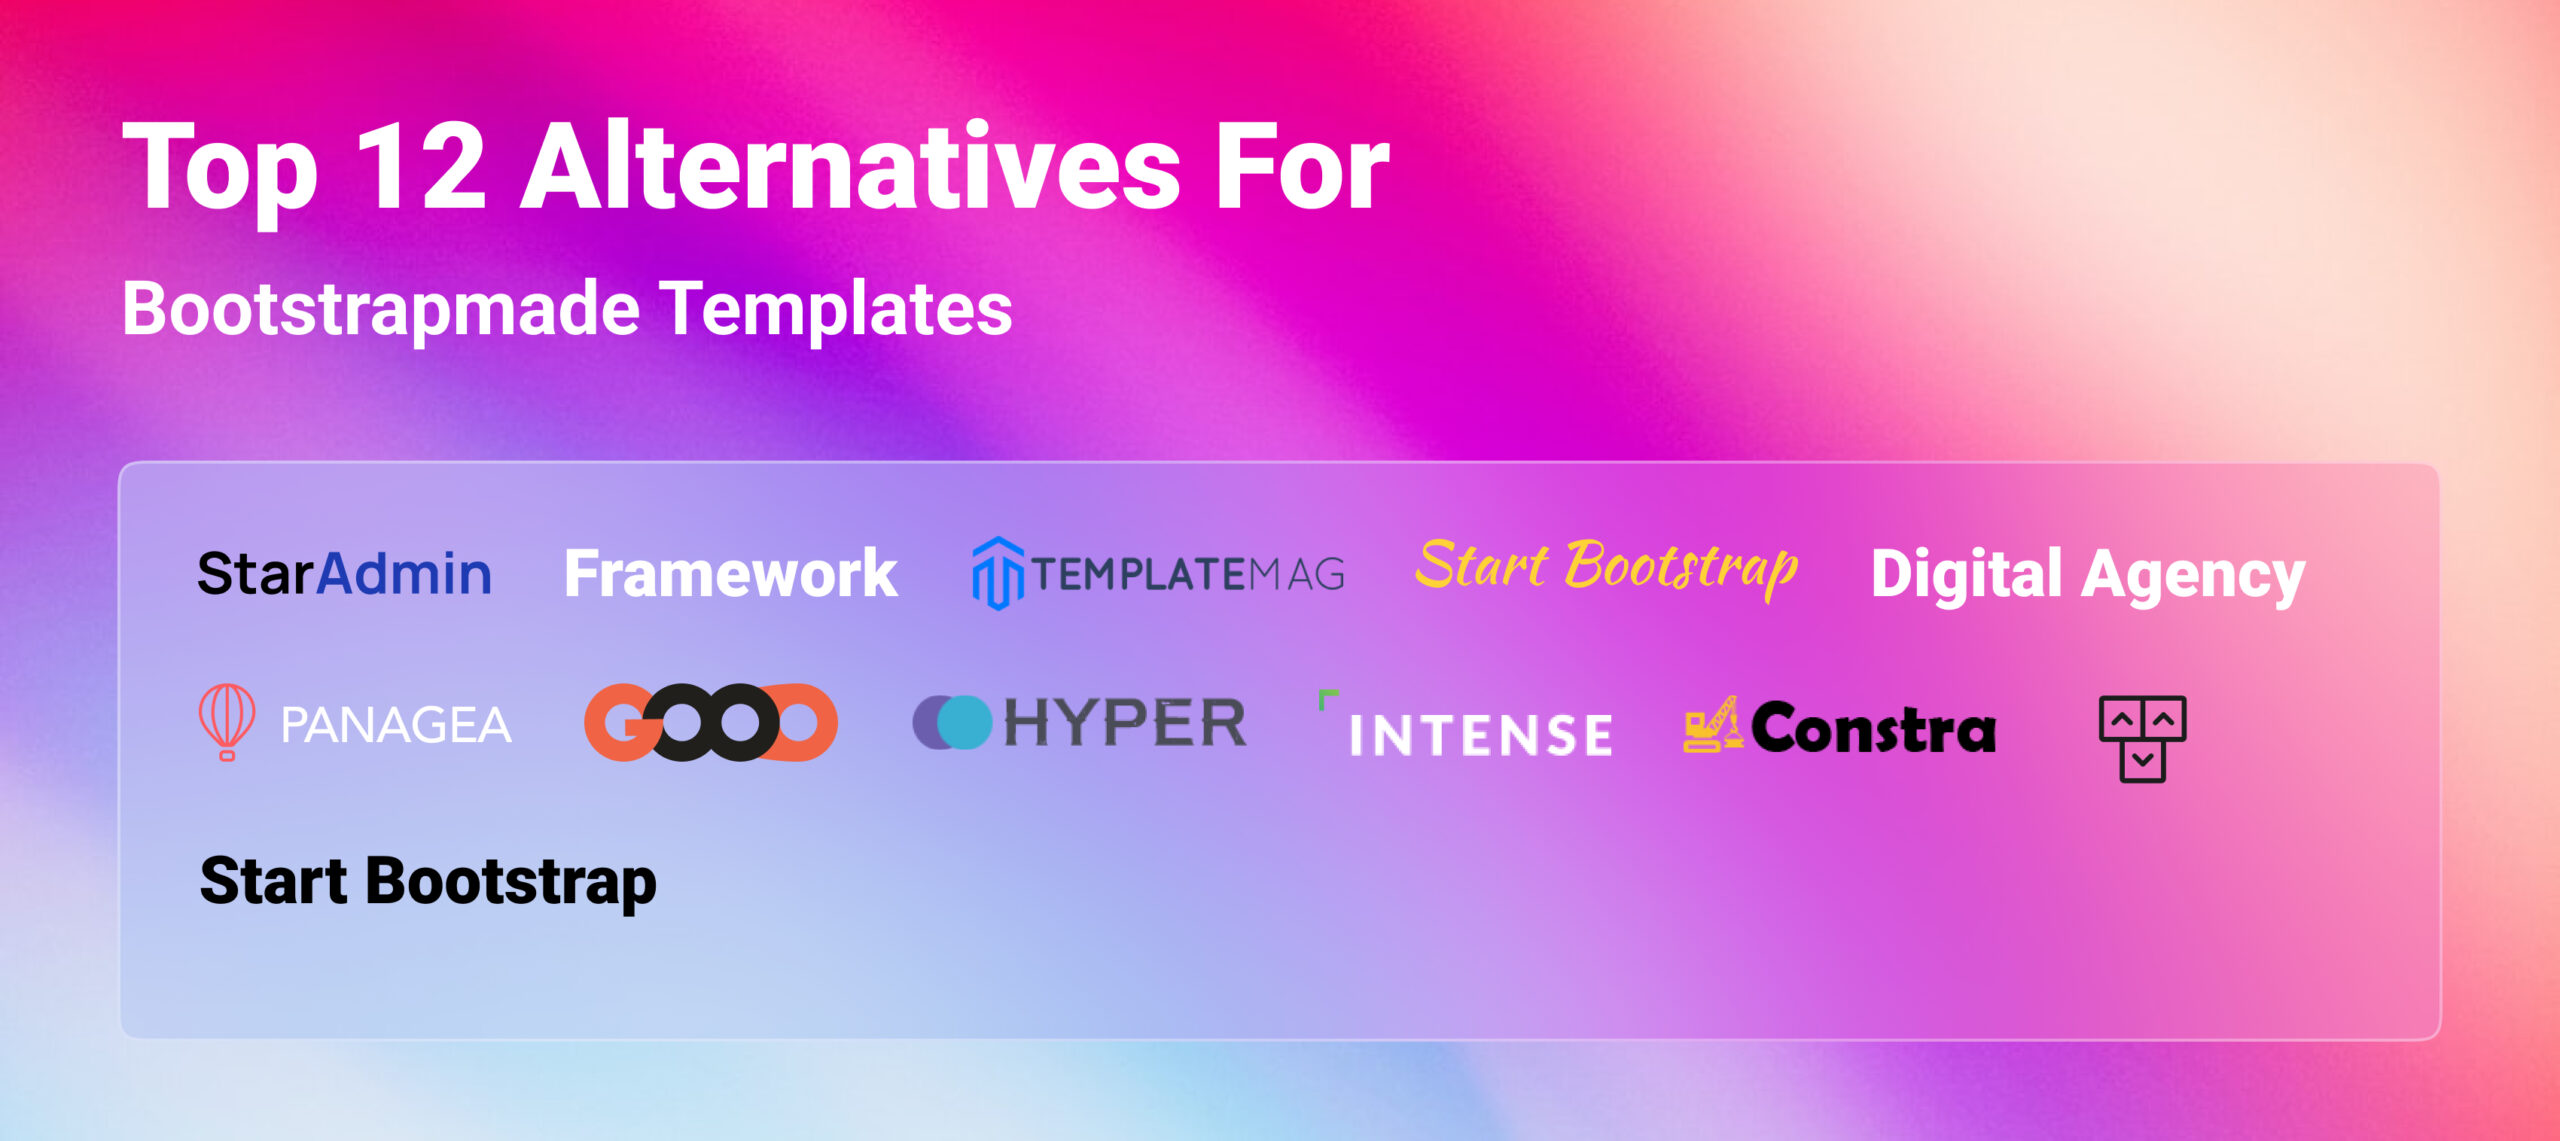  Top 12 Alternatives For Bootstrapmade Templates